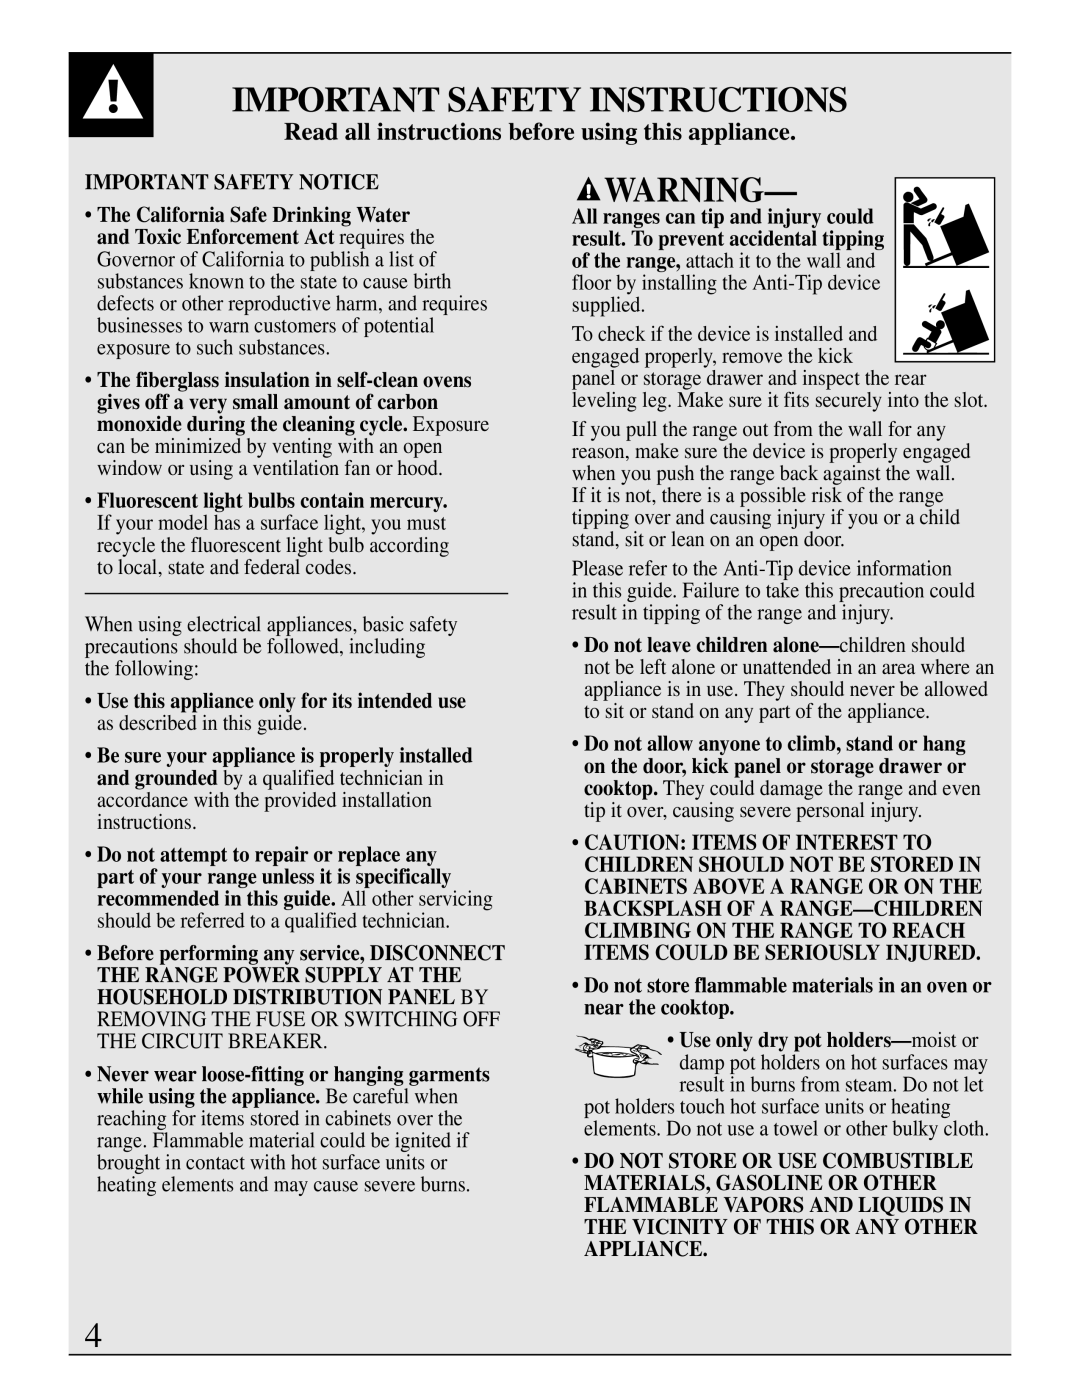 GE JBP95 warranty Important Safety Instructions, Warning, Read all instructions before using this appliance 